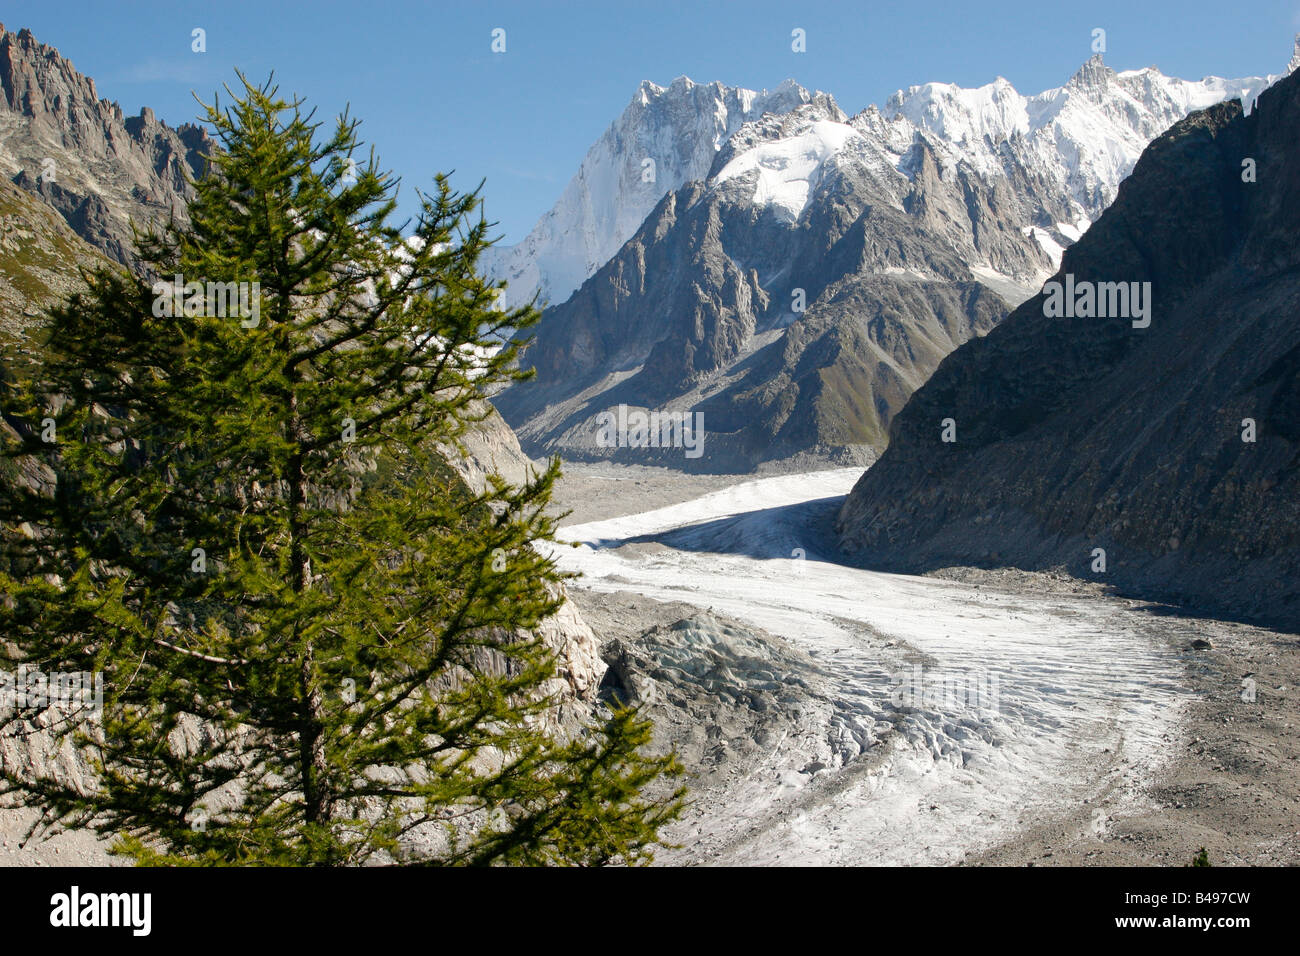 The Mer de Glace glacier viewed from Montenvers, Chamonix Mont-Blanc, French Alps. Stock Photo